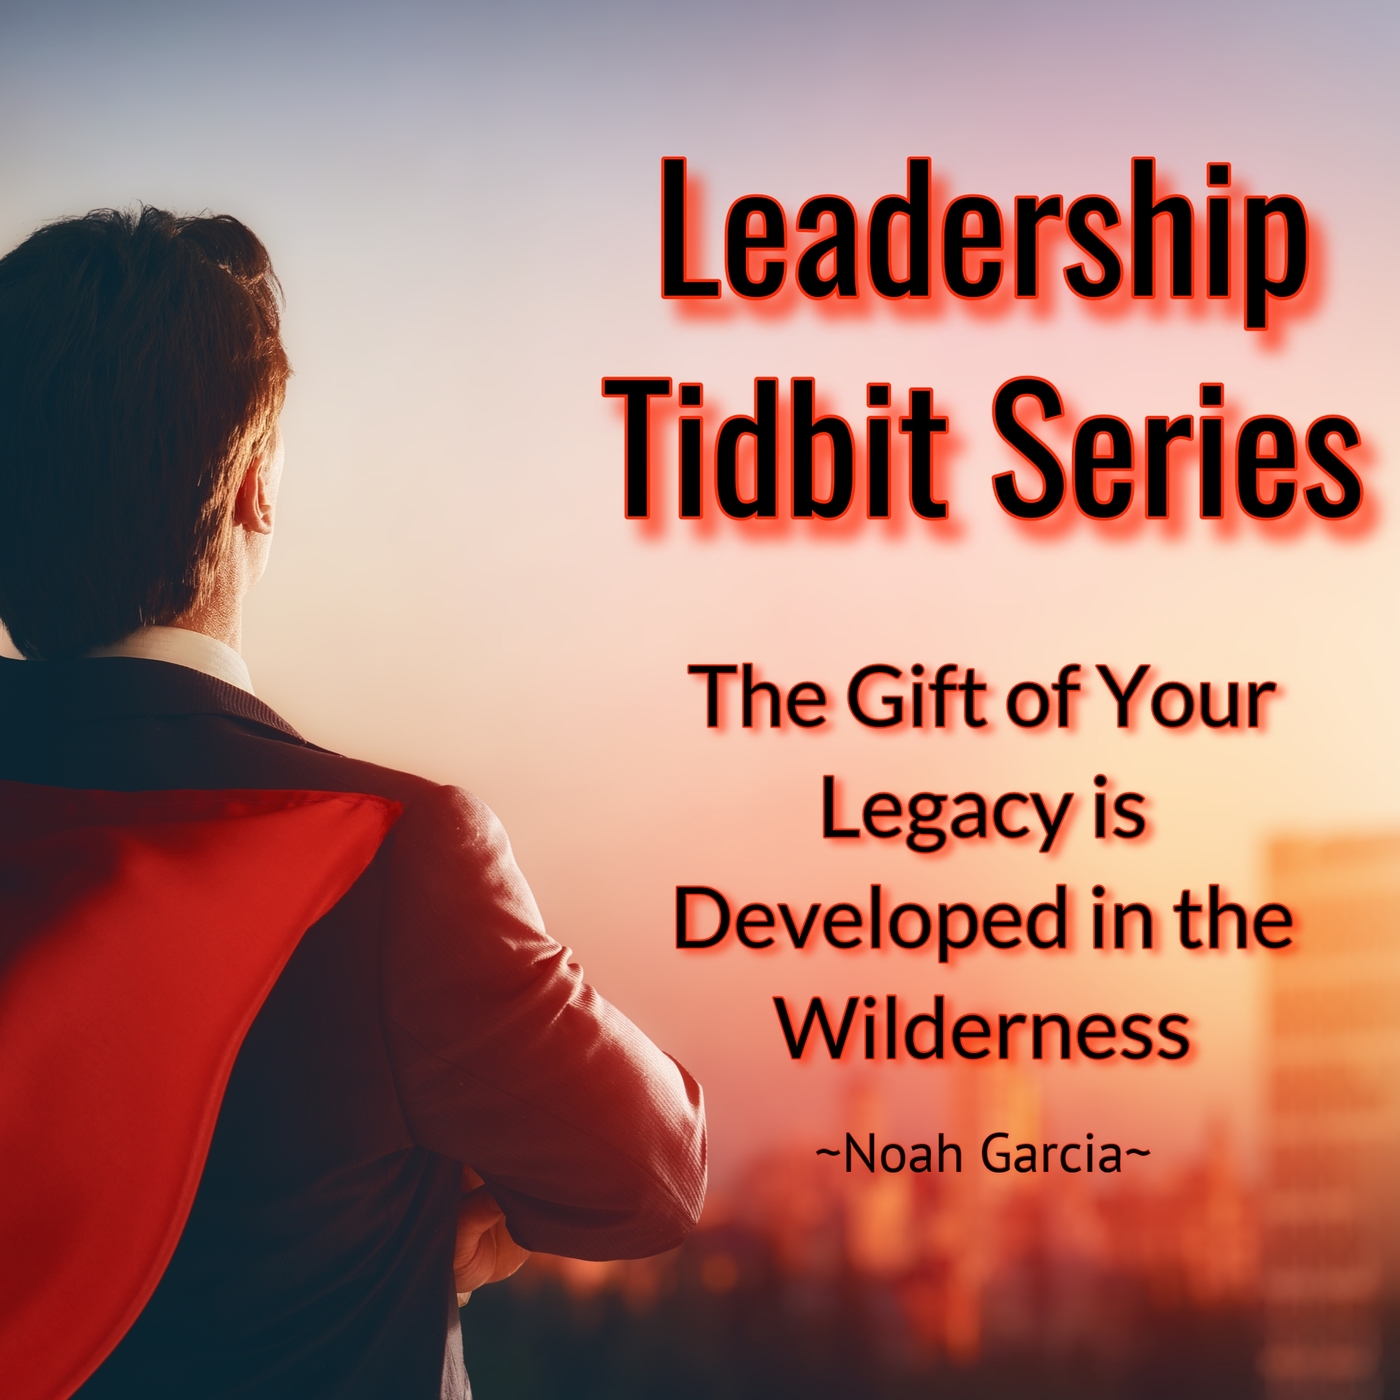 Leadership Tidbit Series: The Gift of Your Legacy is Developed in the Wildnerness